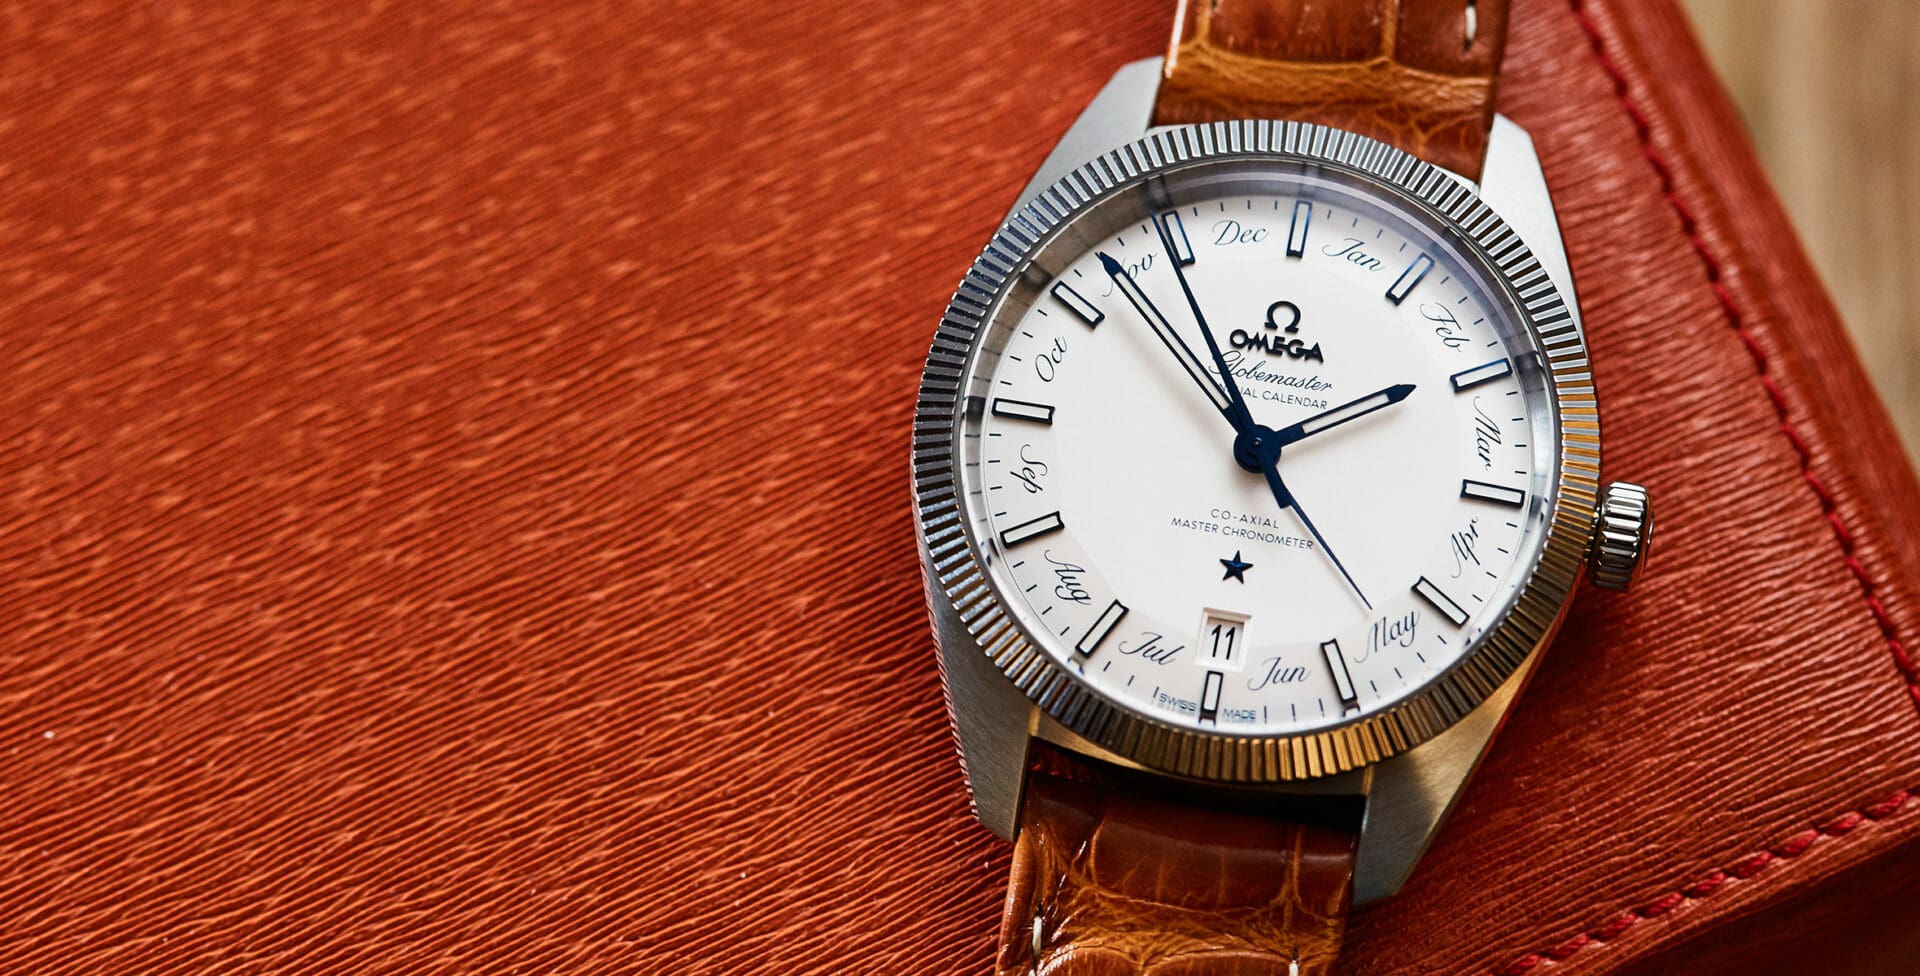 Omega Globemaster Annual Calendar Indepth Review A Watch Ruined by